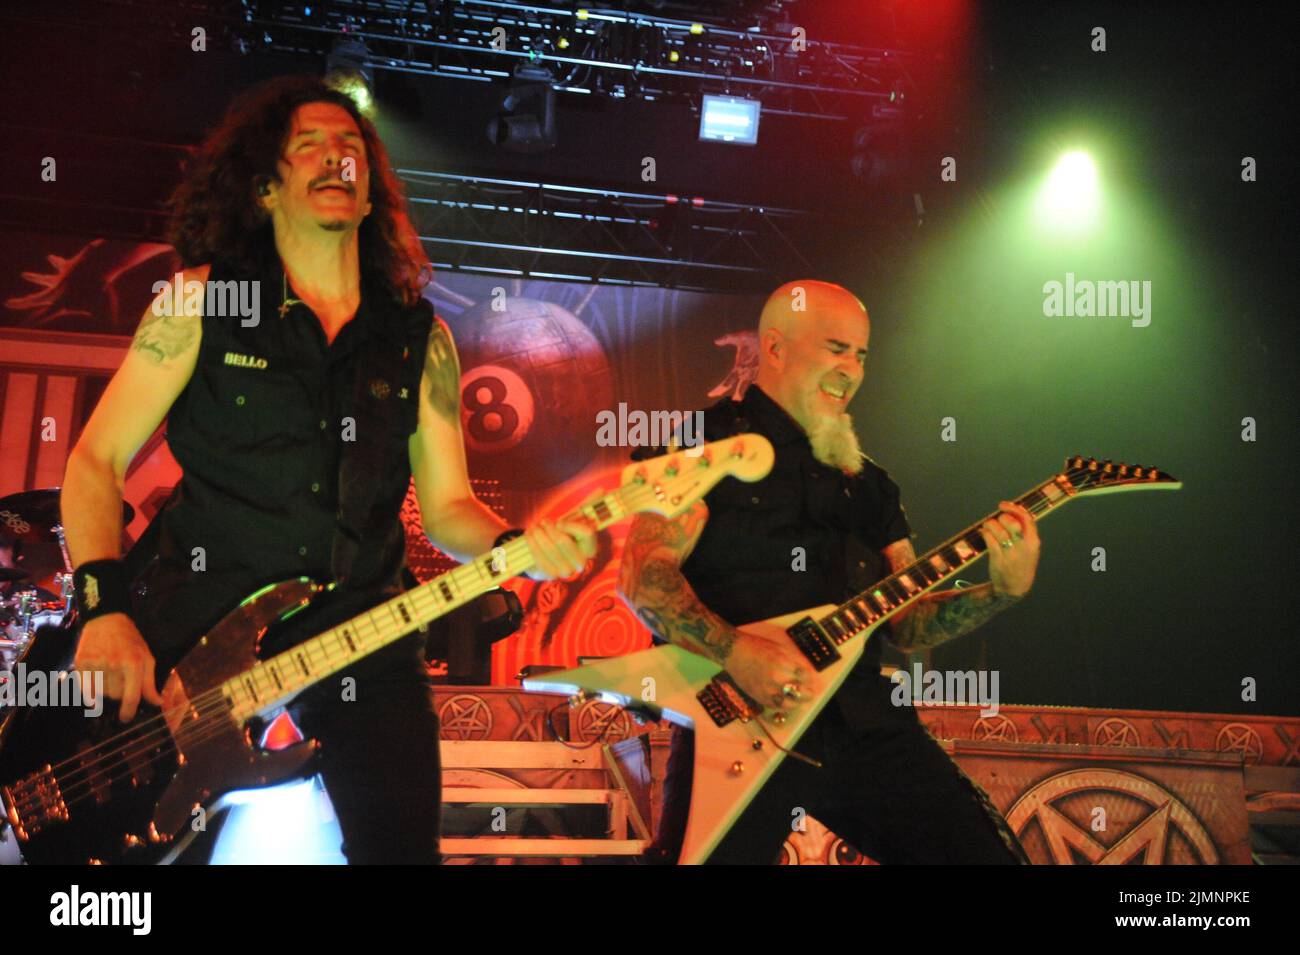 GARY, IN - AOÛT 4: Anthrax se produisant au Hard Rock Casino à Gary, Indiana sur 4 août 2022 Credit: Gene Ambo/MediaPunch Banque D'Images